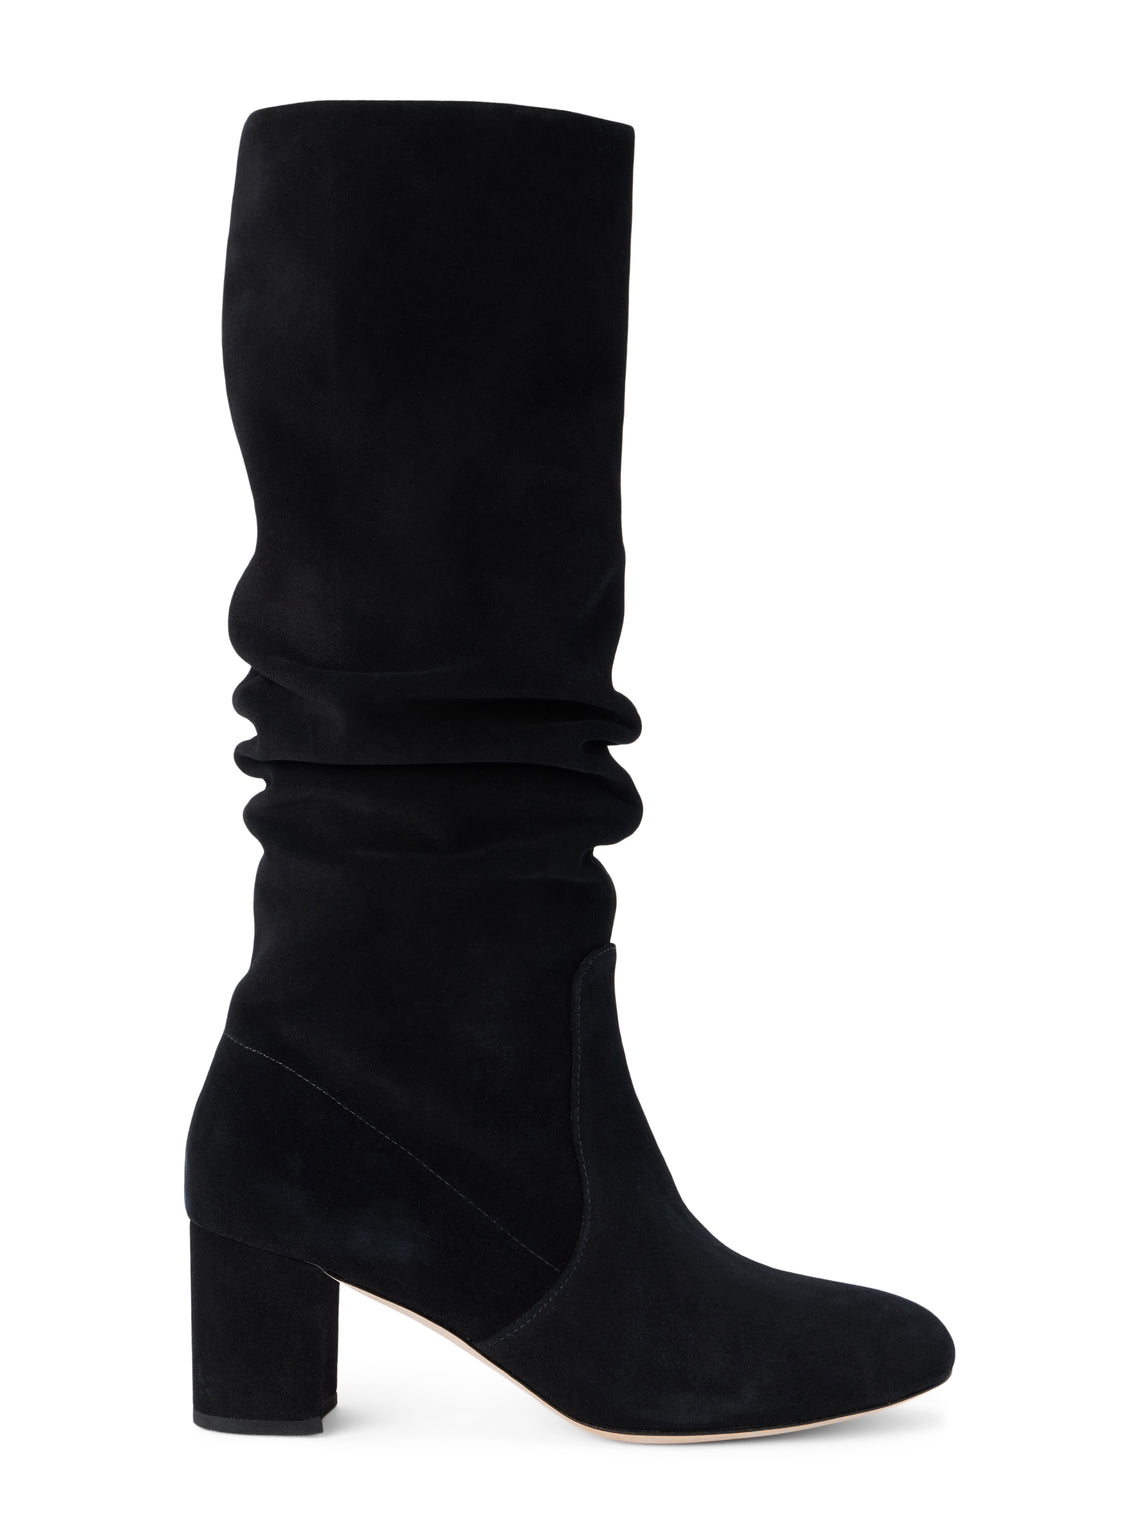 L'AGENCE Ines Boot in Black Suede